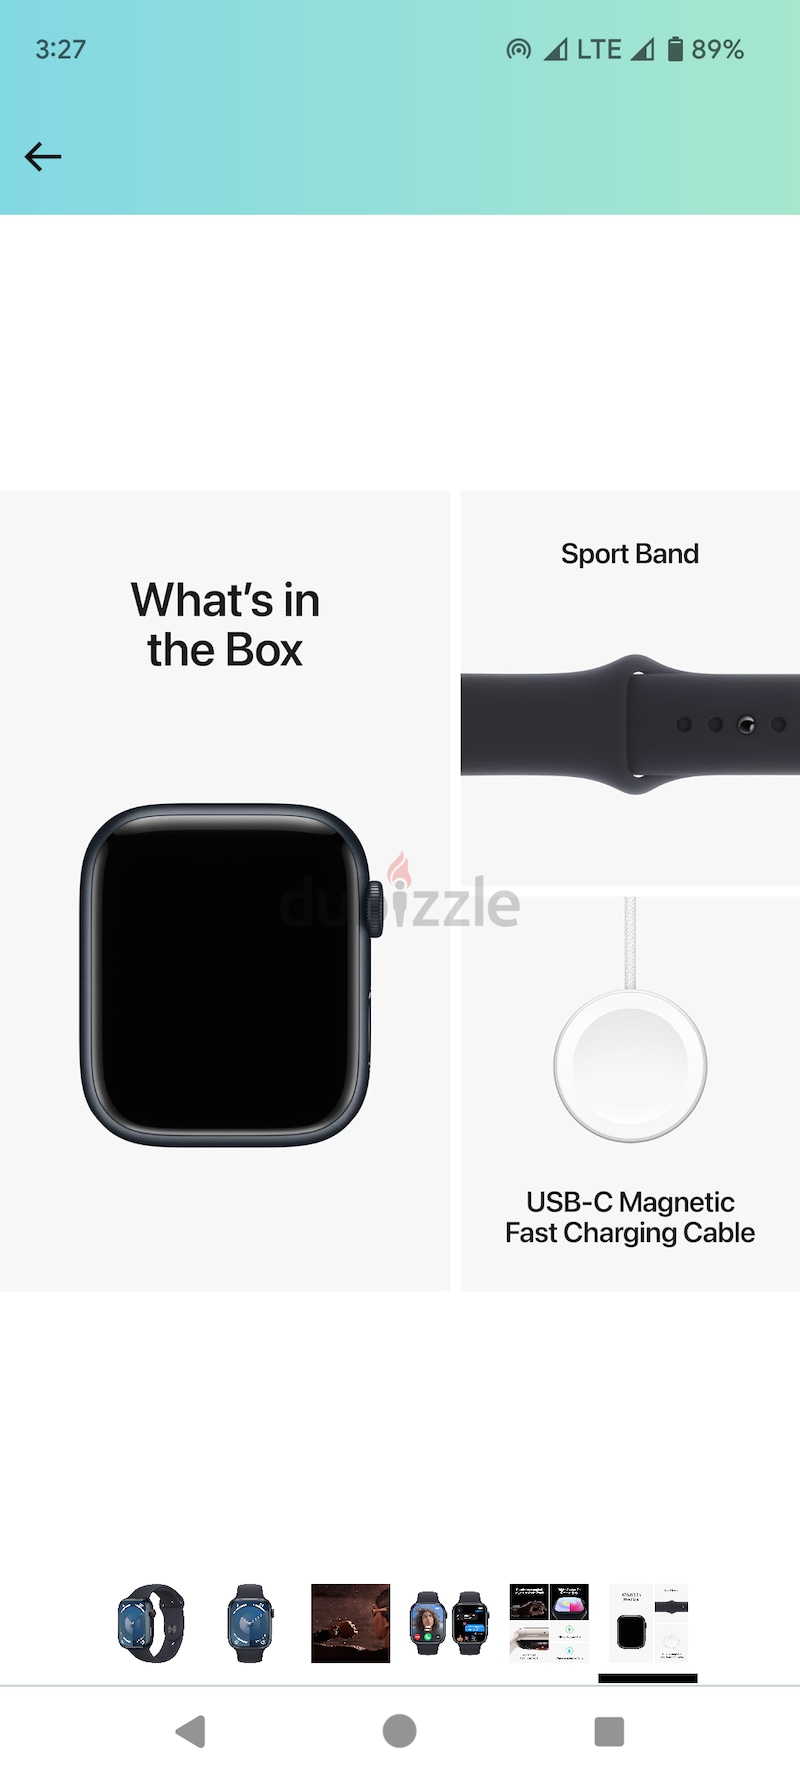  Apple Watch Series 9 [GPS 41mm] Smartwatch with